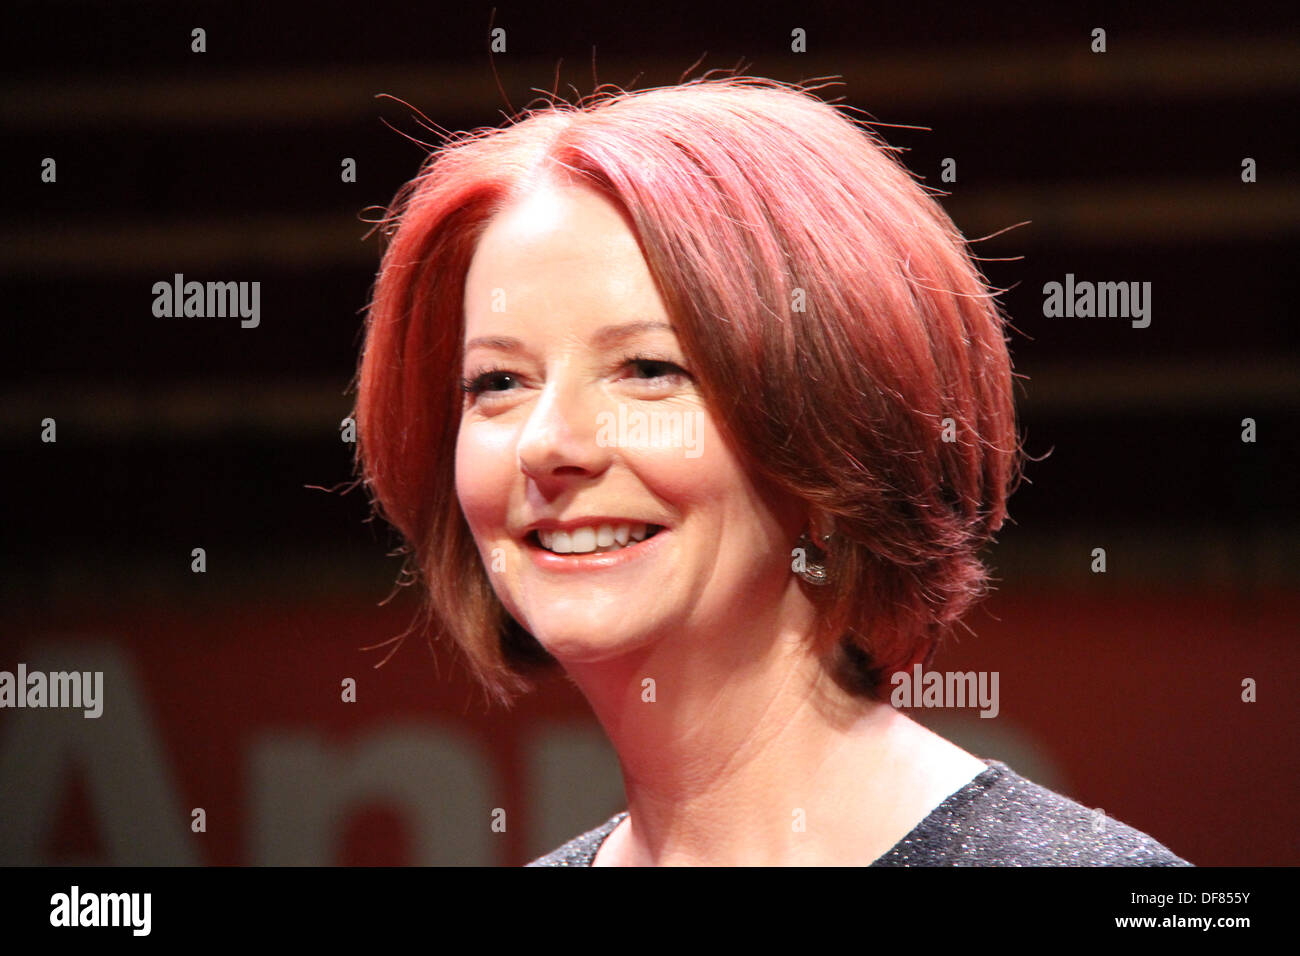 Sydney, Australia. 30th Sep, 2013. Julia Gillard makes her first public appearance since leaving the Prime Ministership in an interview with Anne Summers at the Sydney Opera House. Photos taken at photo-call before the event. Pictured is former Australian Prime Minister Julia Gillard. Credit:  Richard Milnes/Alamy Live News Stock Photo